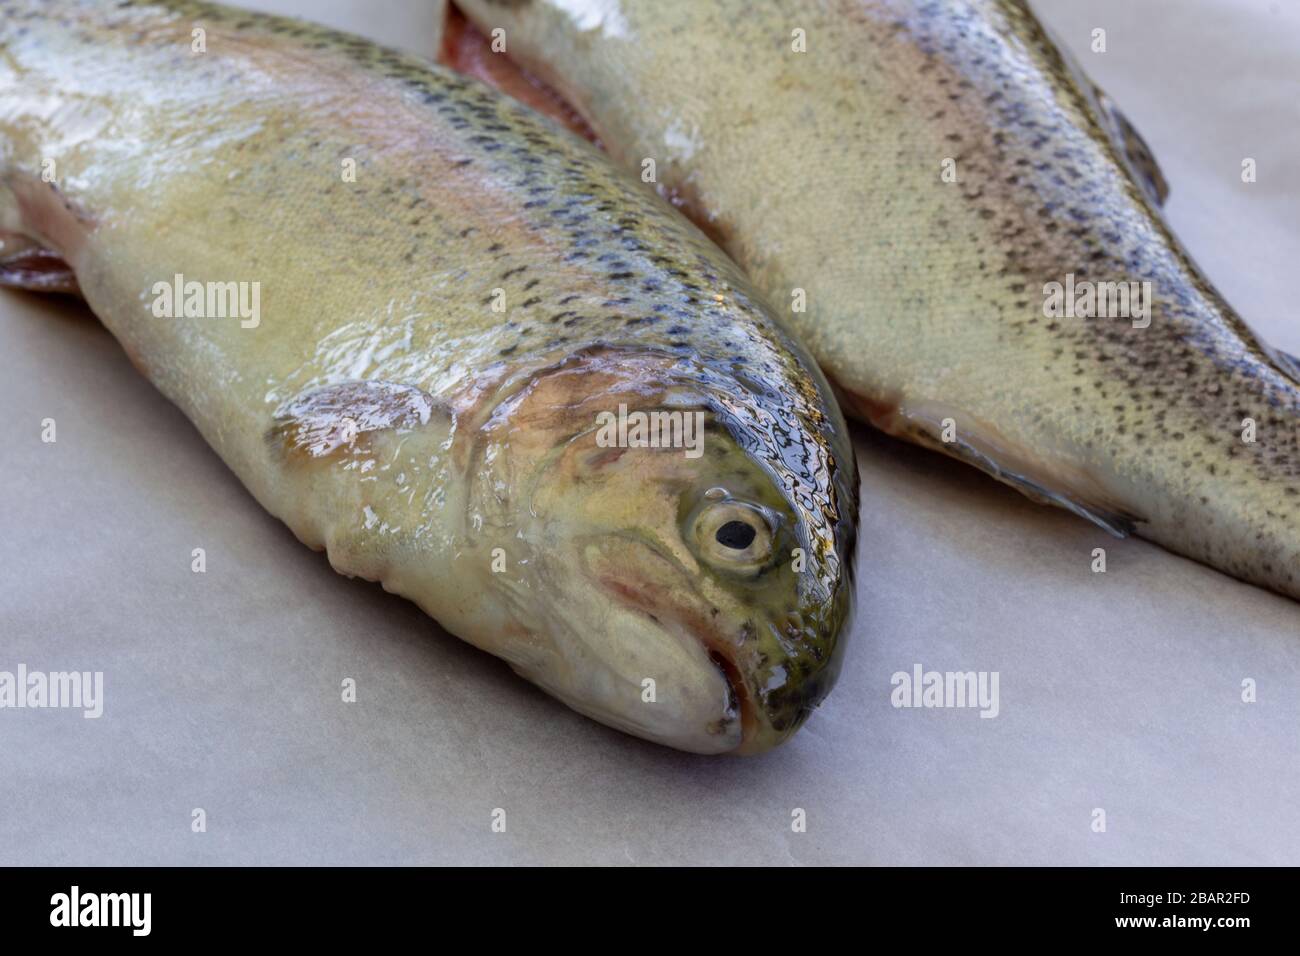 fresh rainbow trouts (Oncorhynchus mykiss) on a sheet of wrapping paper closeup Stock Photo